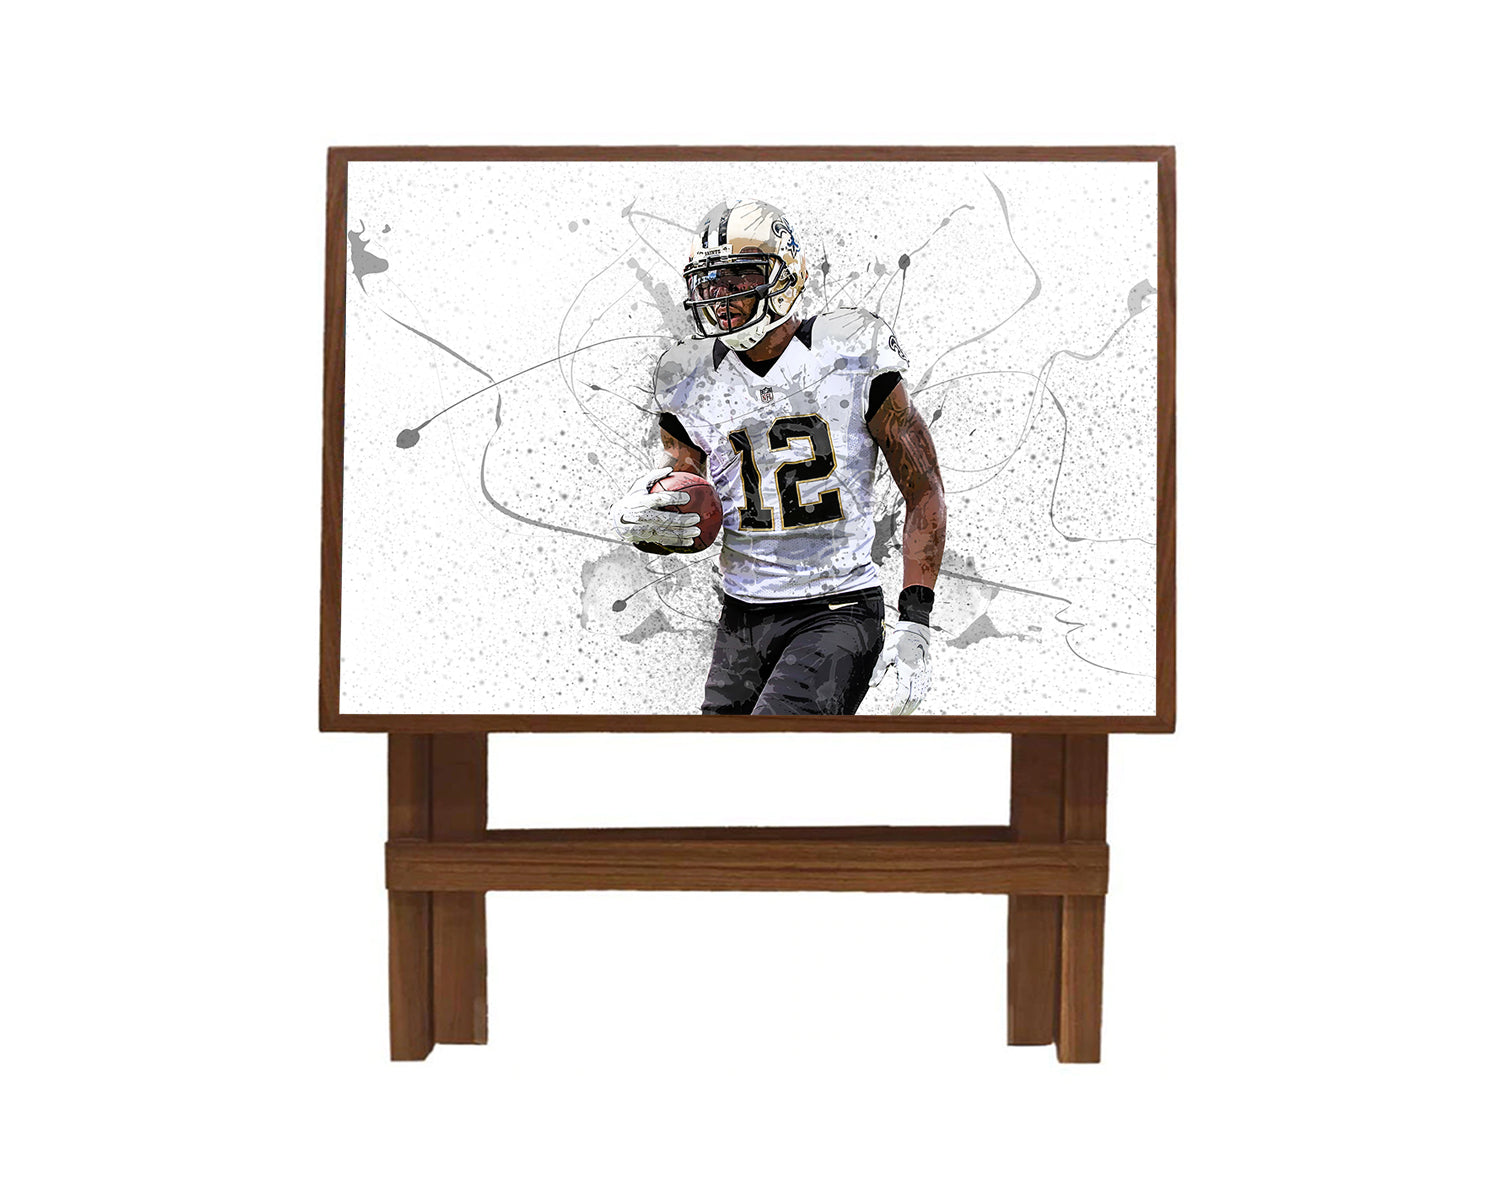 Marques Colston Splash Effect Coffee and Laptop Table 